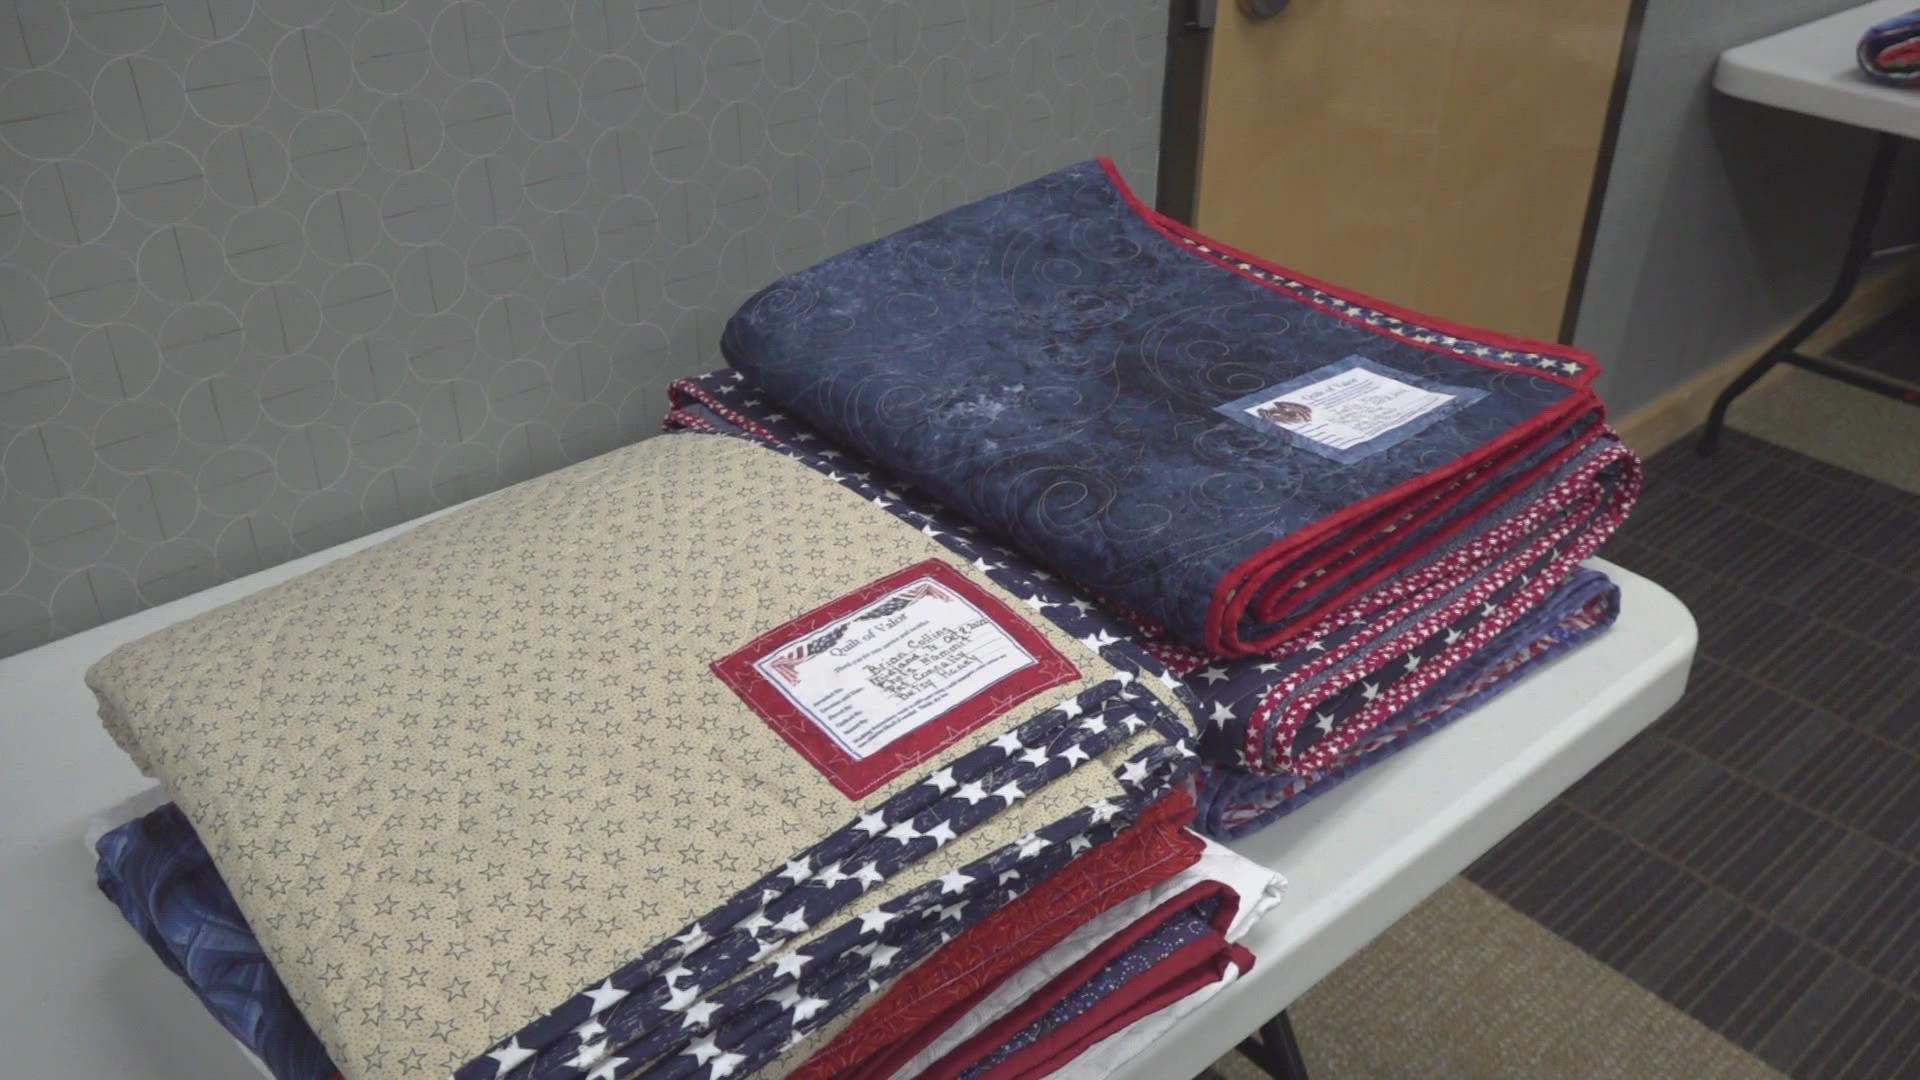 The Midland Quilters Guild had the event at Midland College, rewarding veterans with unique, handmade quilts.